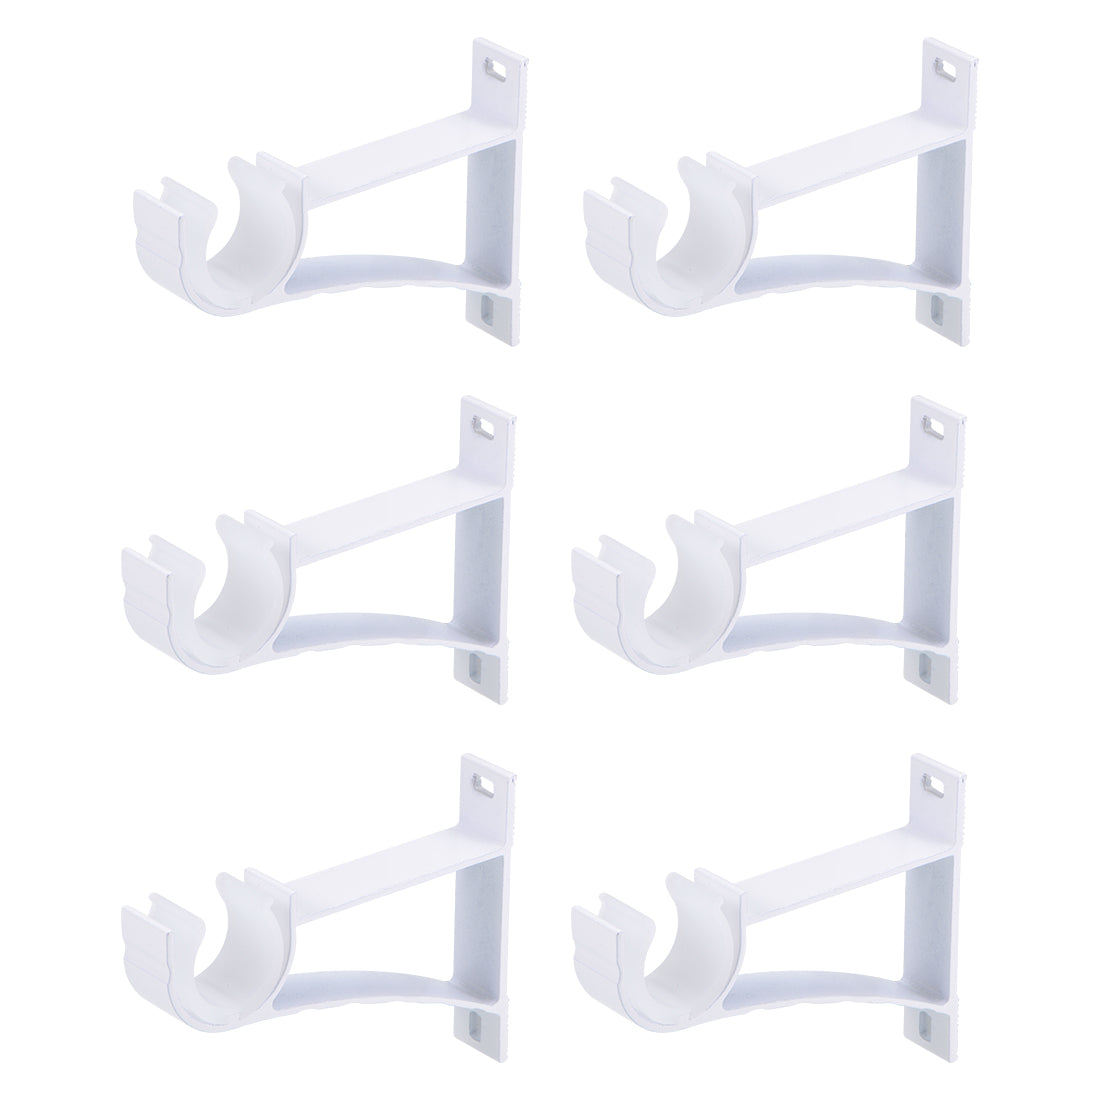 uxcell Uxcell Curtain Rod Bracket Aluminum Alloy Single Holder Support for 24mm Drapery Rod 108 x 82 x 19mm White 6 Pcs